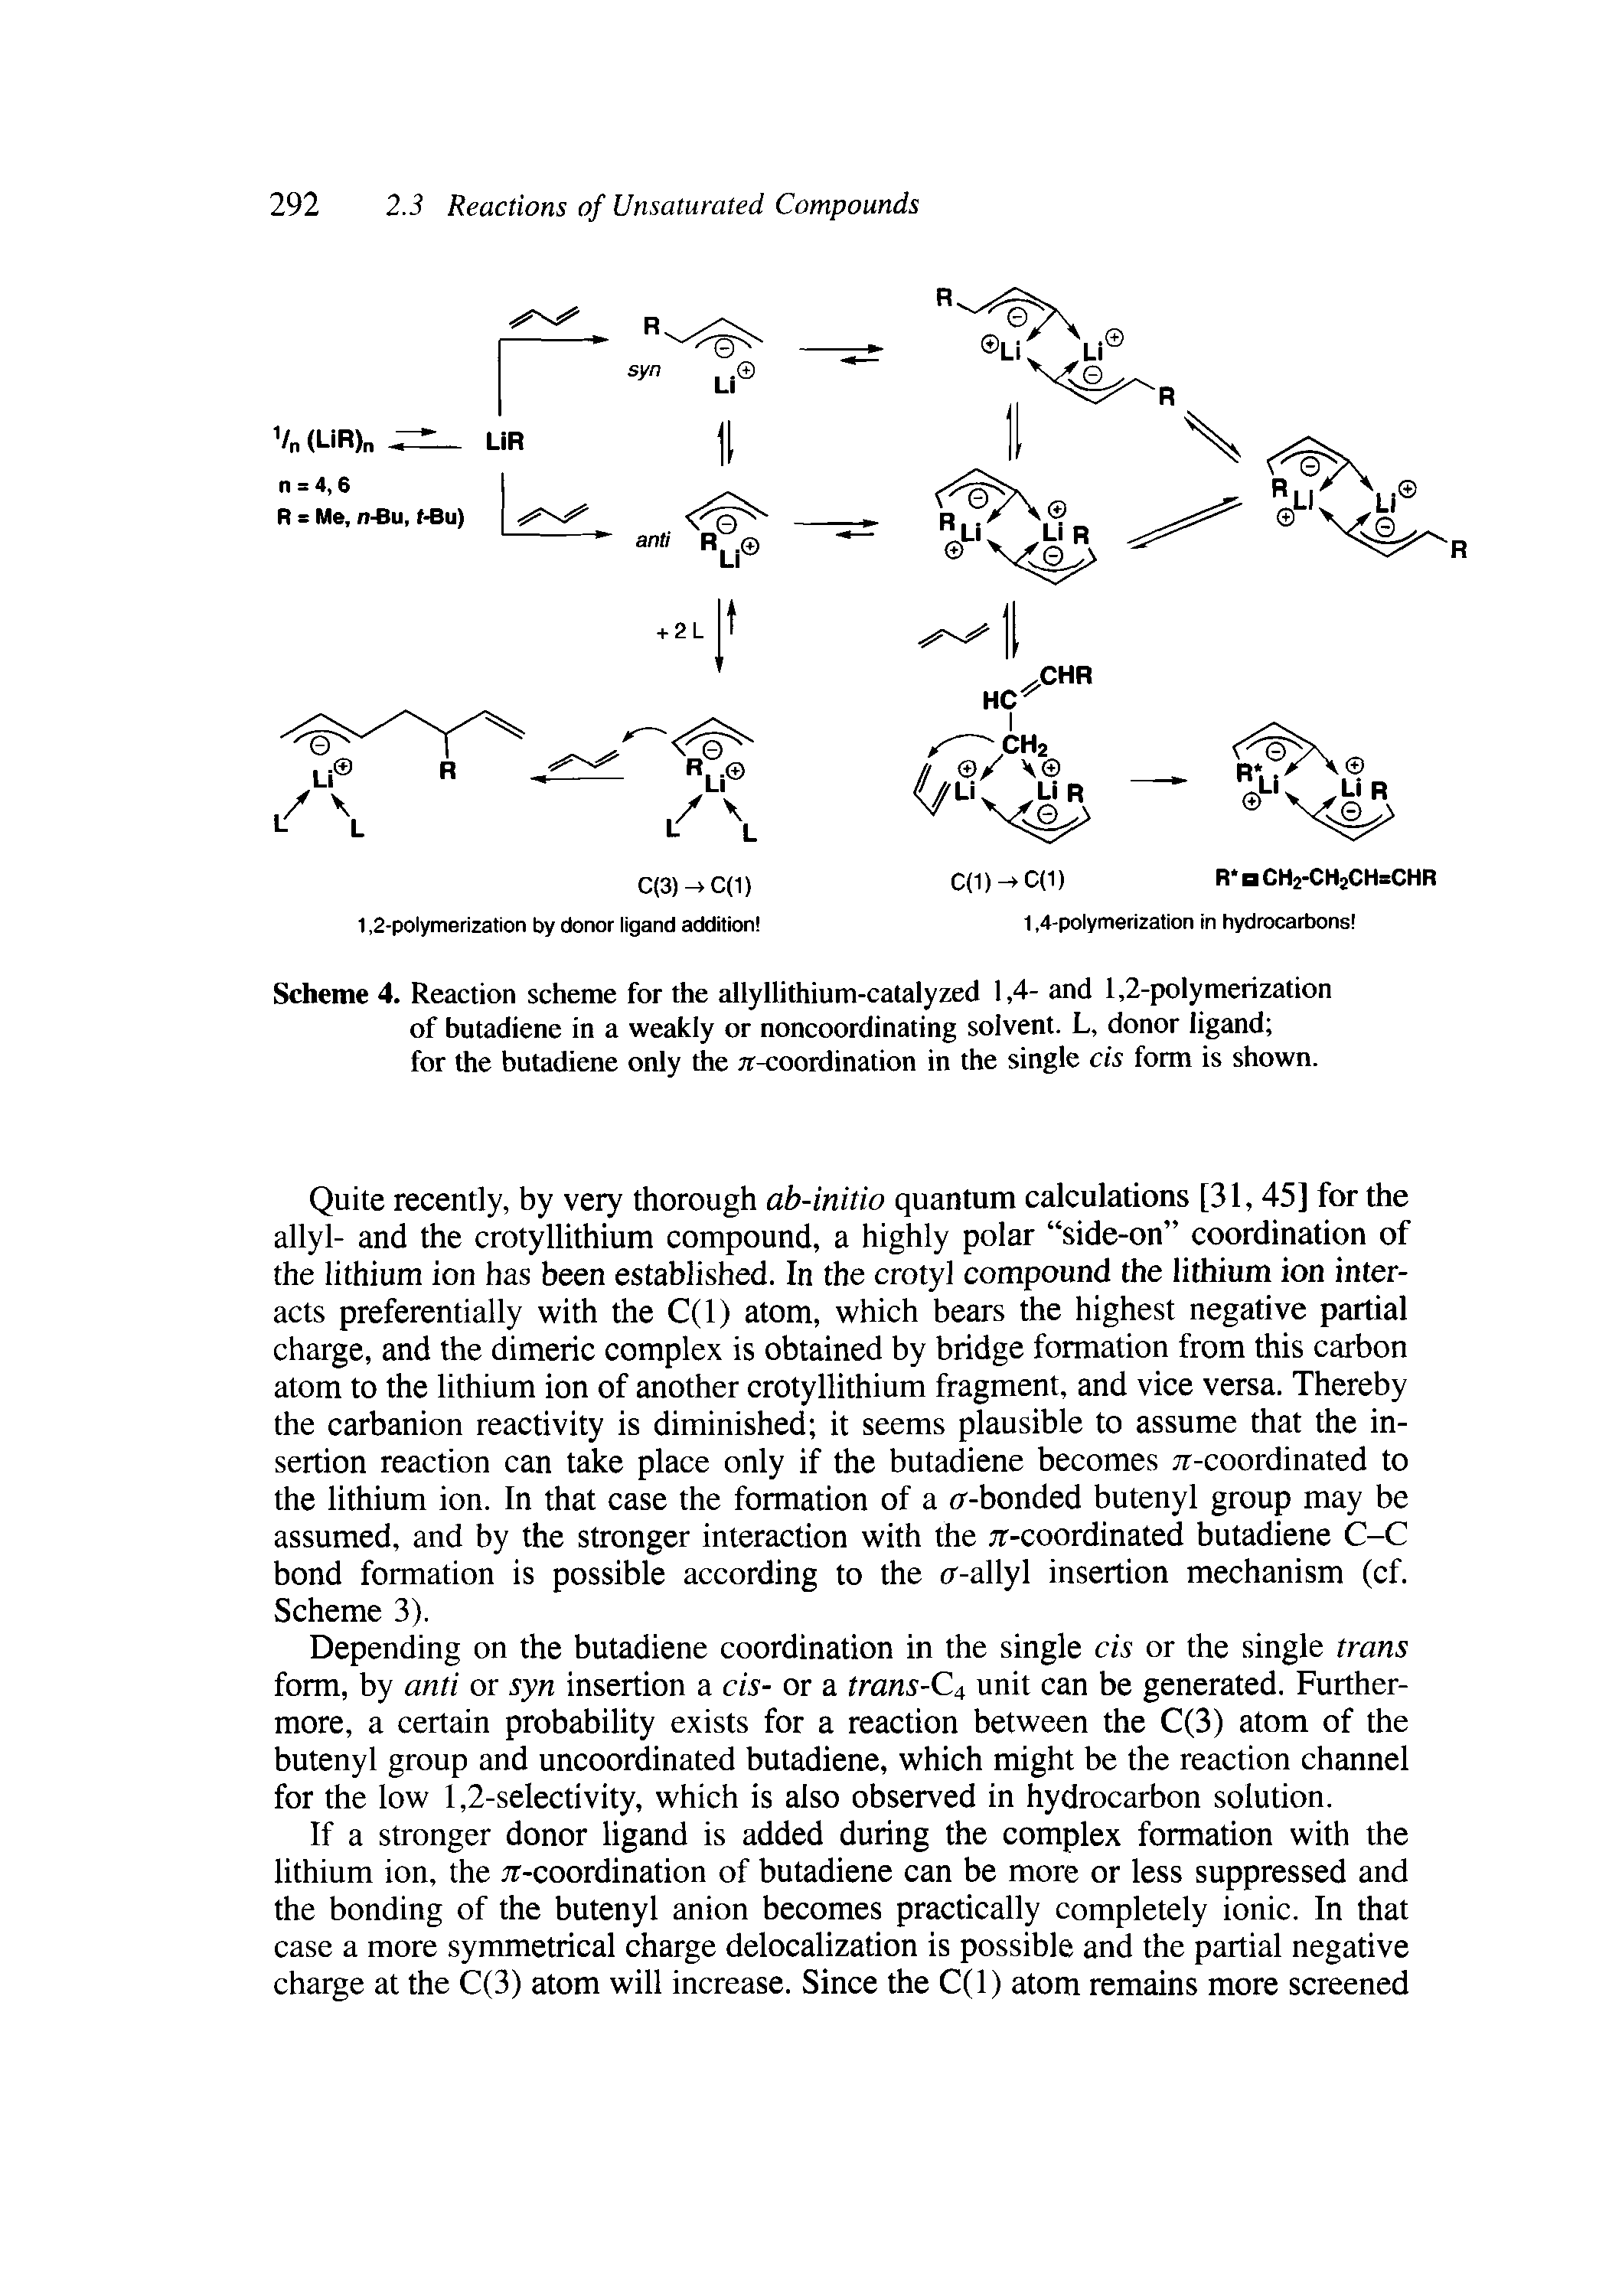 Scheme 4. Reaction scheme for the allyllithium-catalyzed 1,4- and 1,2-polymerization of butadiene in a weakly or noncoordinating solvent. L, donor ligand for the butadiene only the jr-coordination in the single cis form is shown.